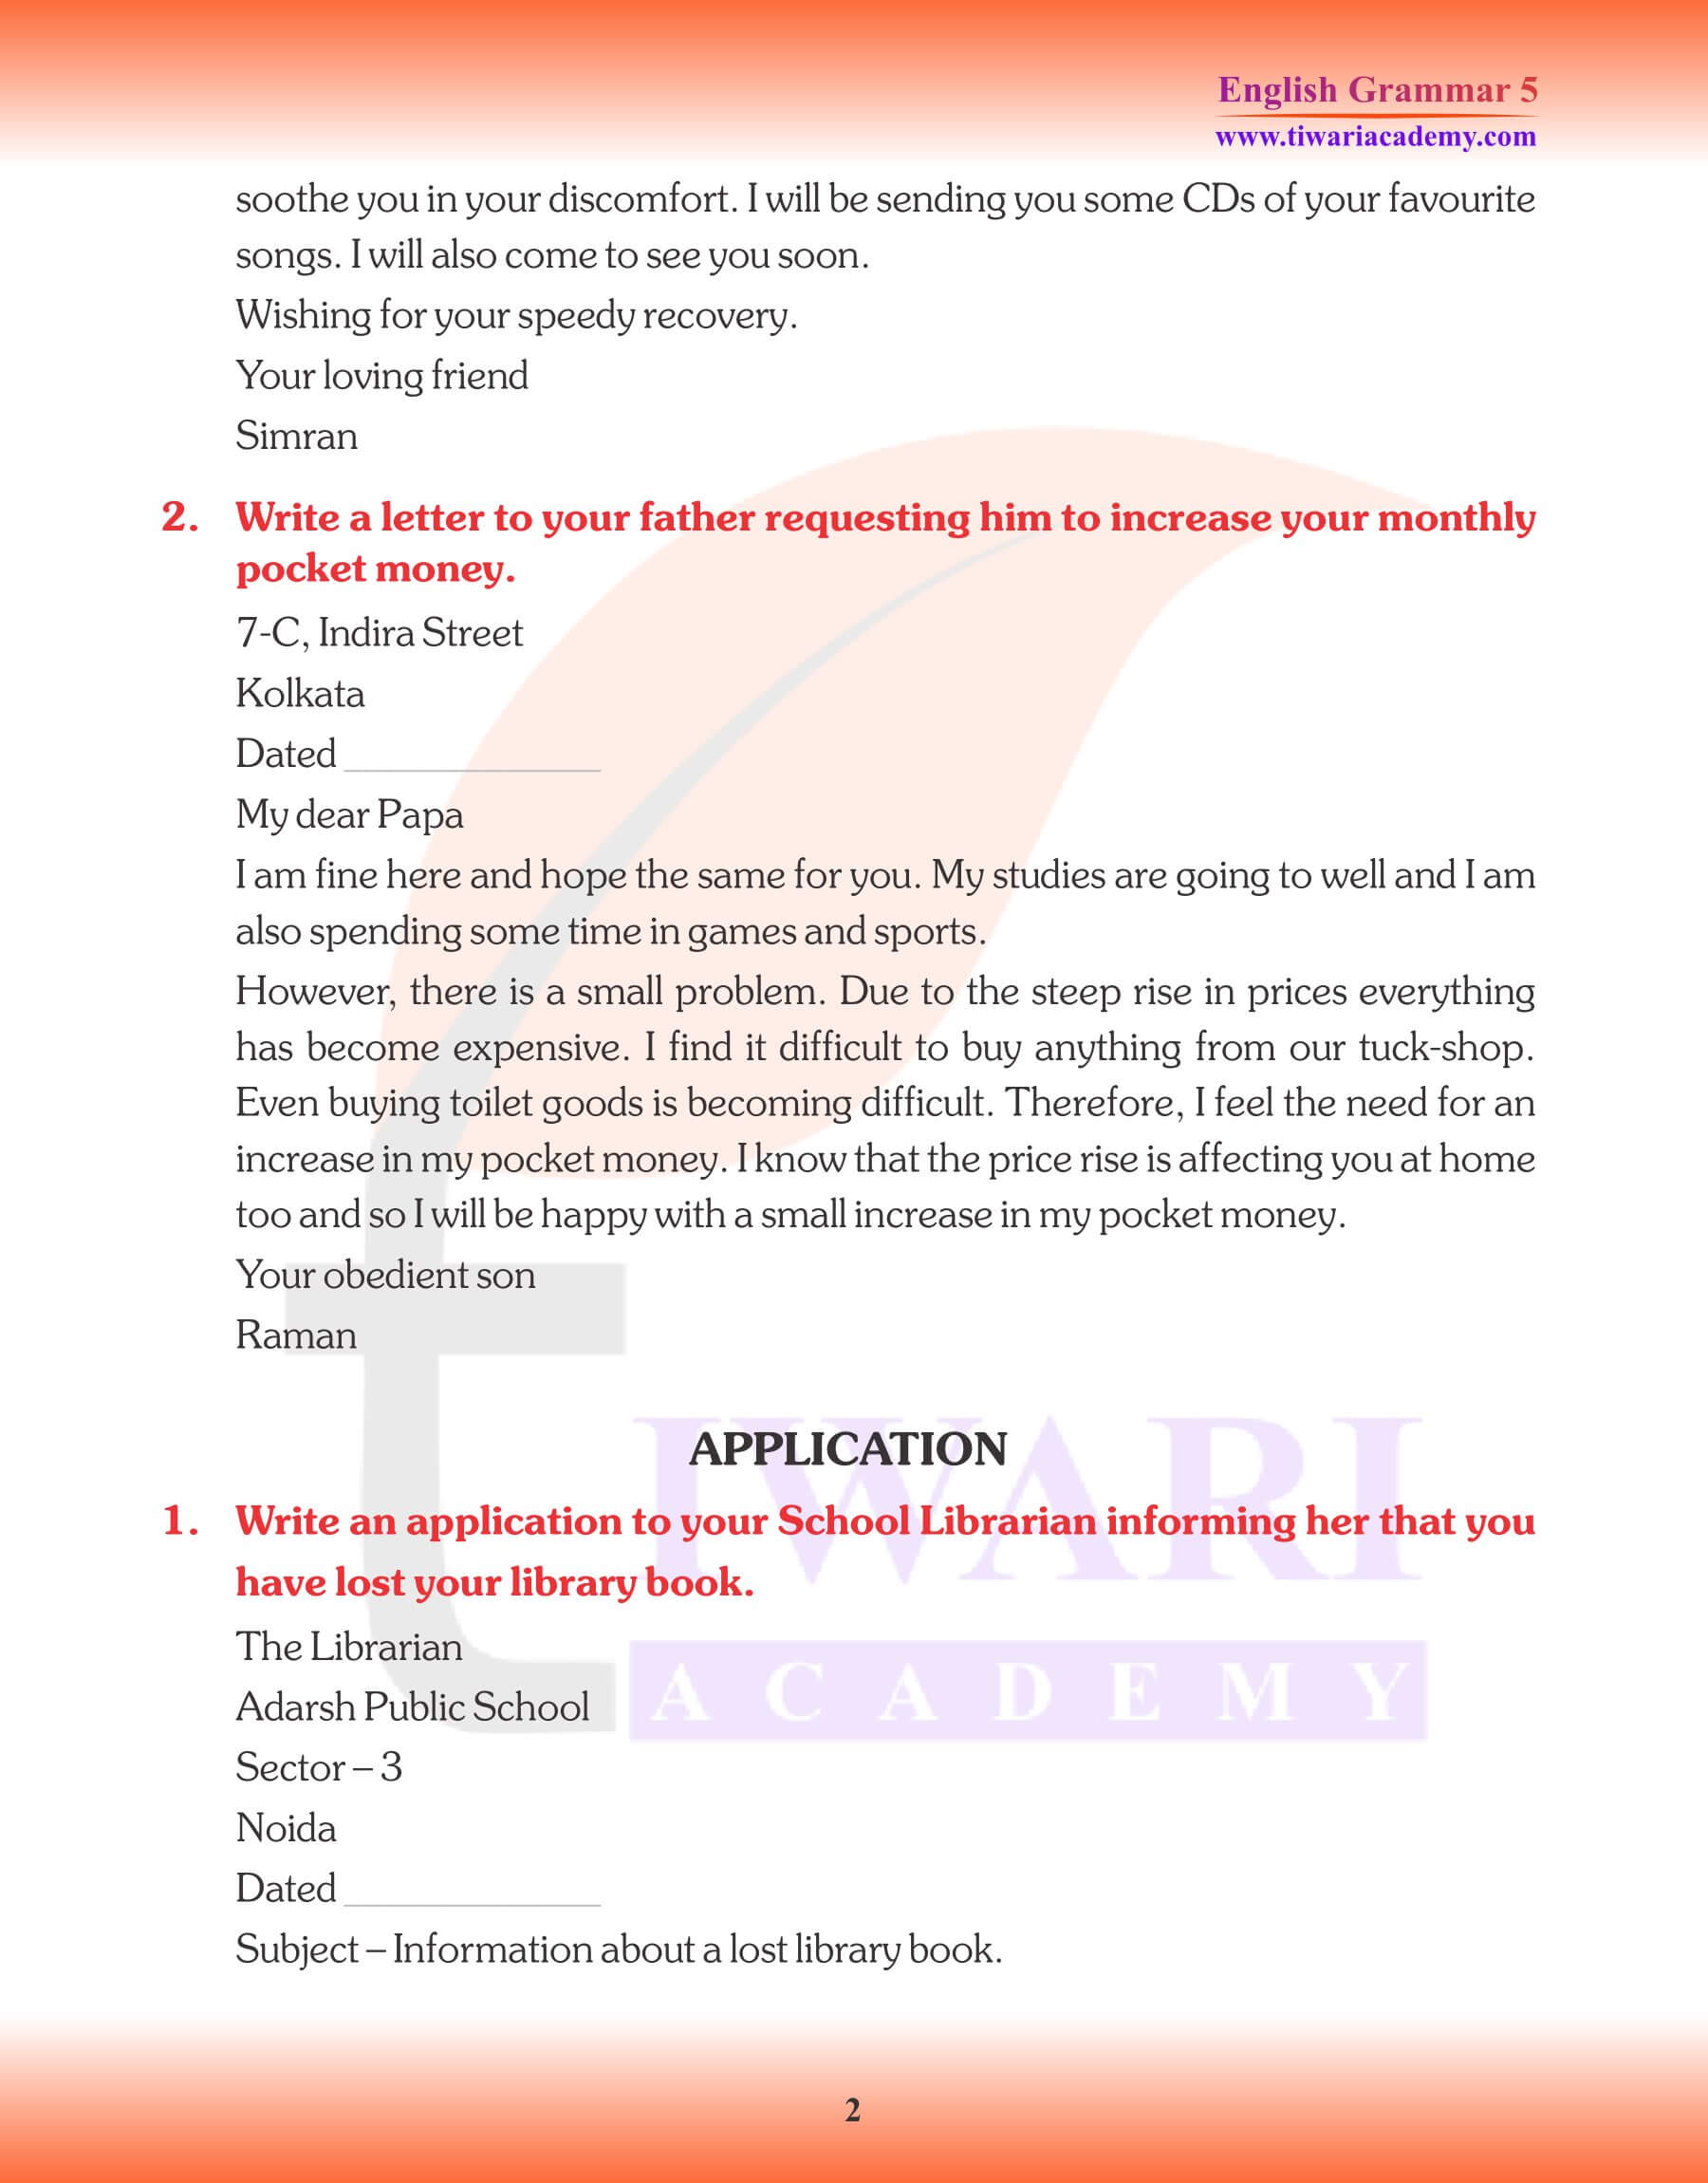 Class 5 English Grammar Letter writing Examples